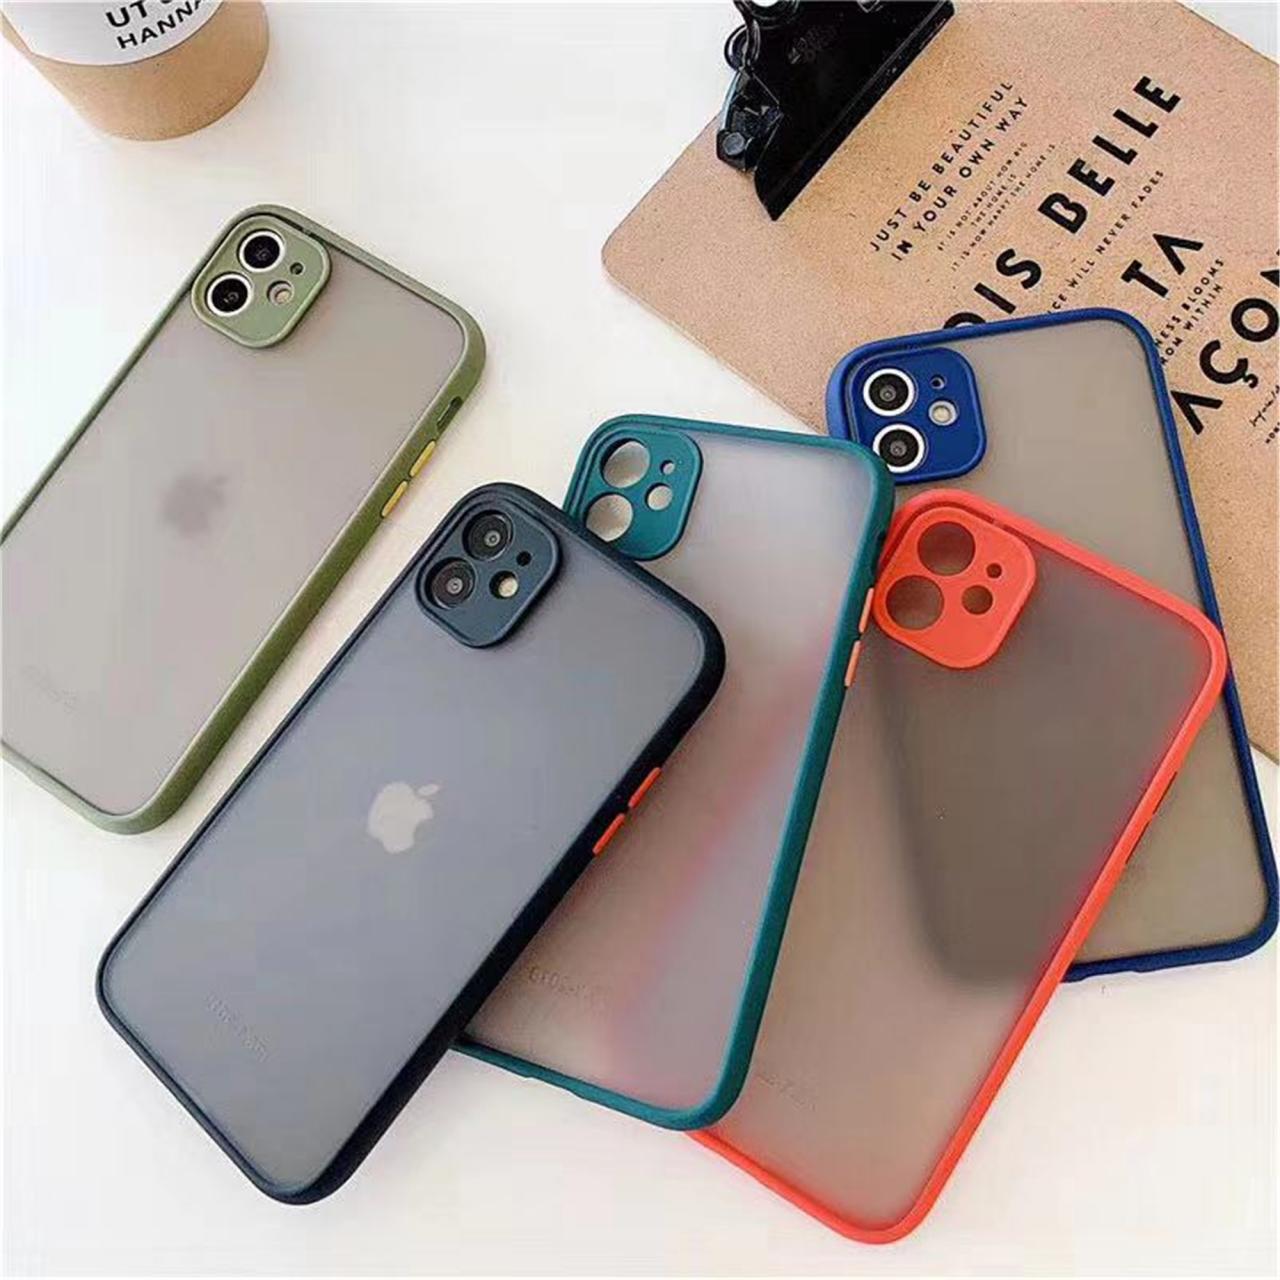 Iphone 12 13 Case Frosted Case Iphone 11 Pro Case Clear Rubber Iphone 12 Pro Max Case Iphone Xs Iphone Xs Max Iphone Xr Se2 7 8 13 Mini Case